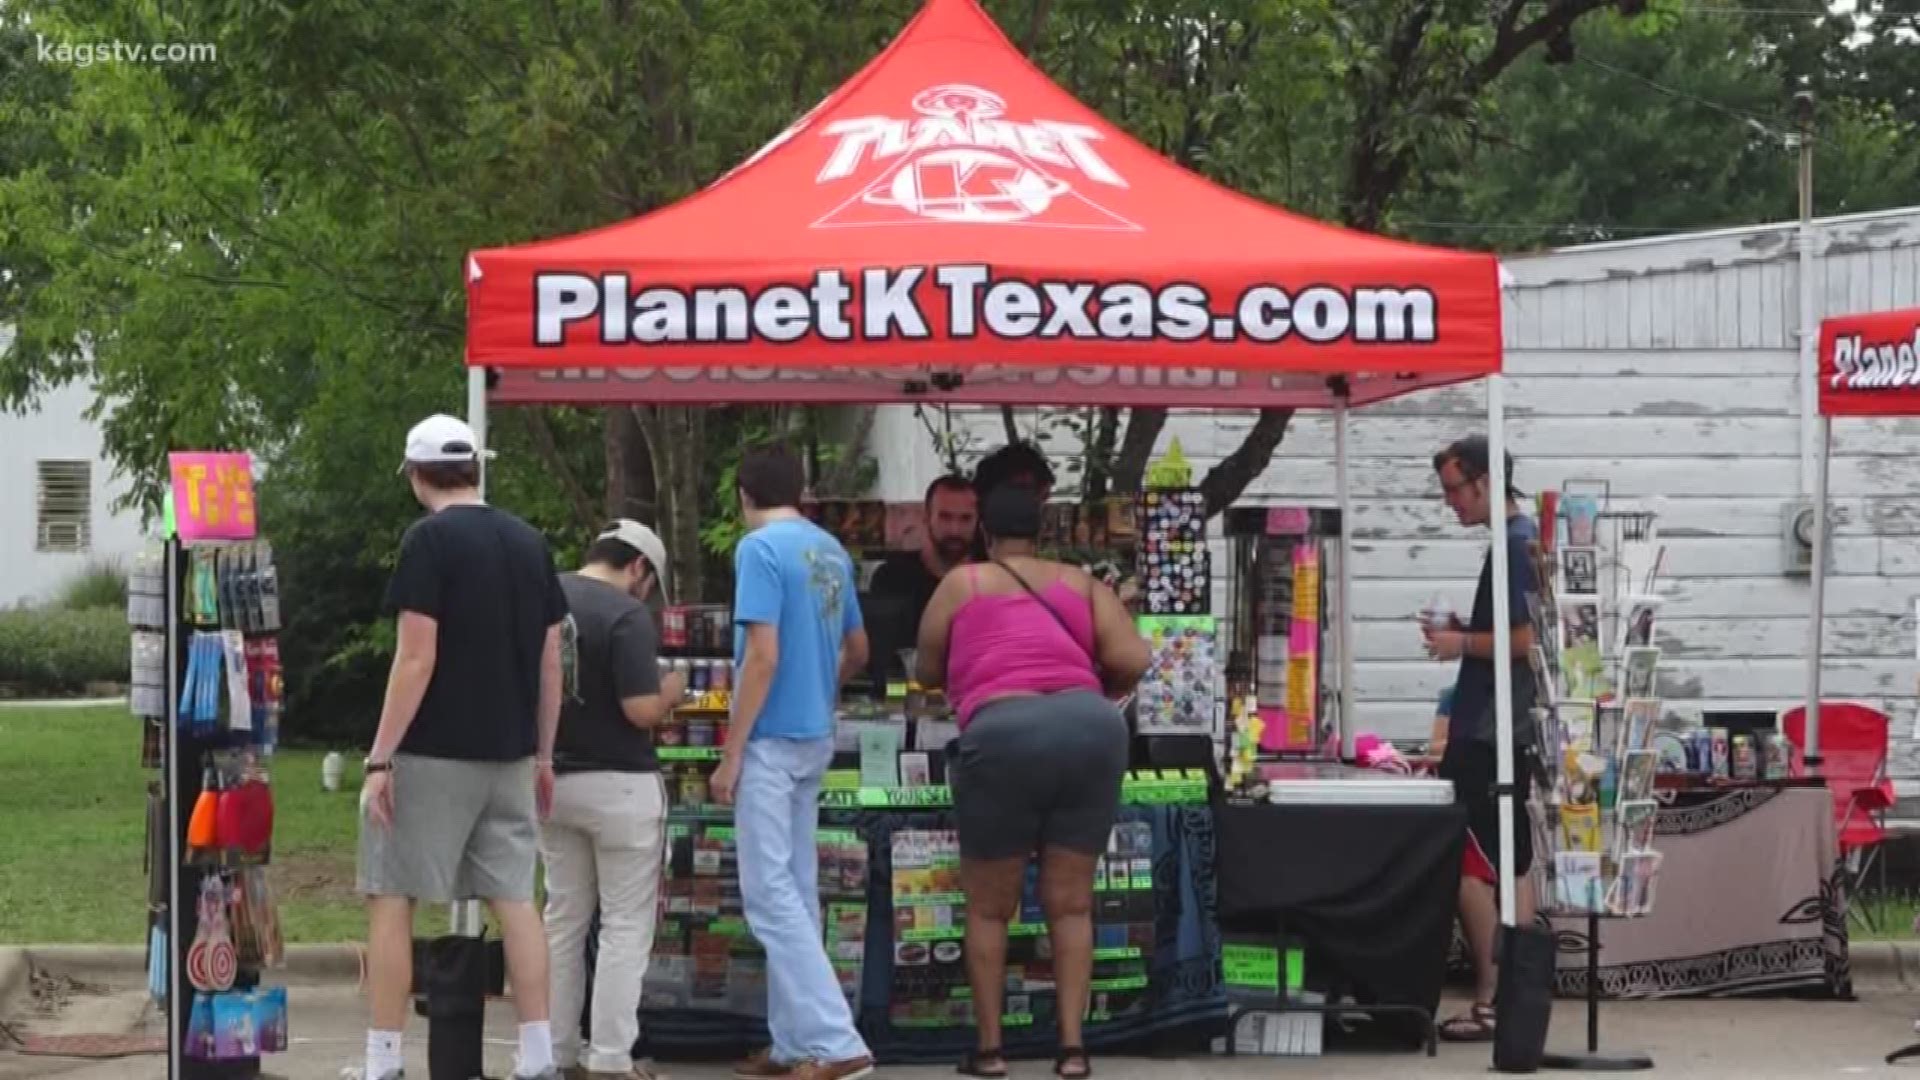 Disputes between Planet K and the City of Bryan have reached a head, the Austin-based store is now suing the city.